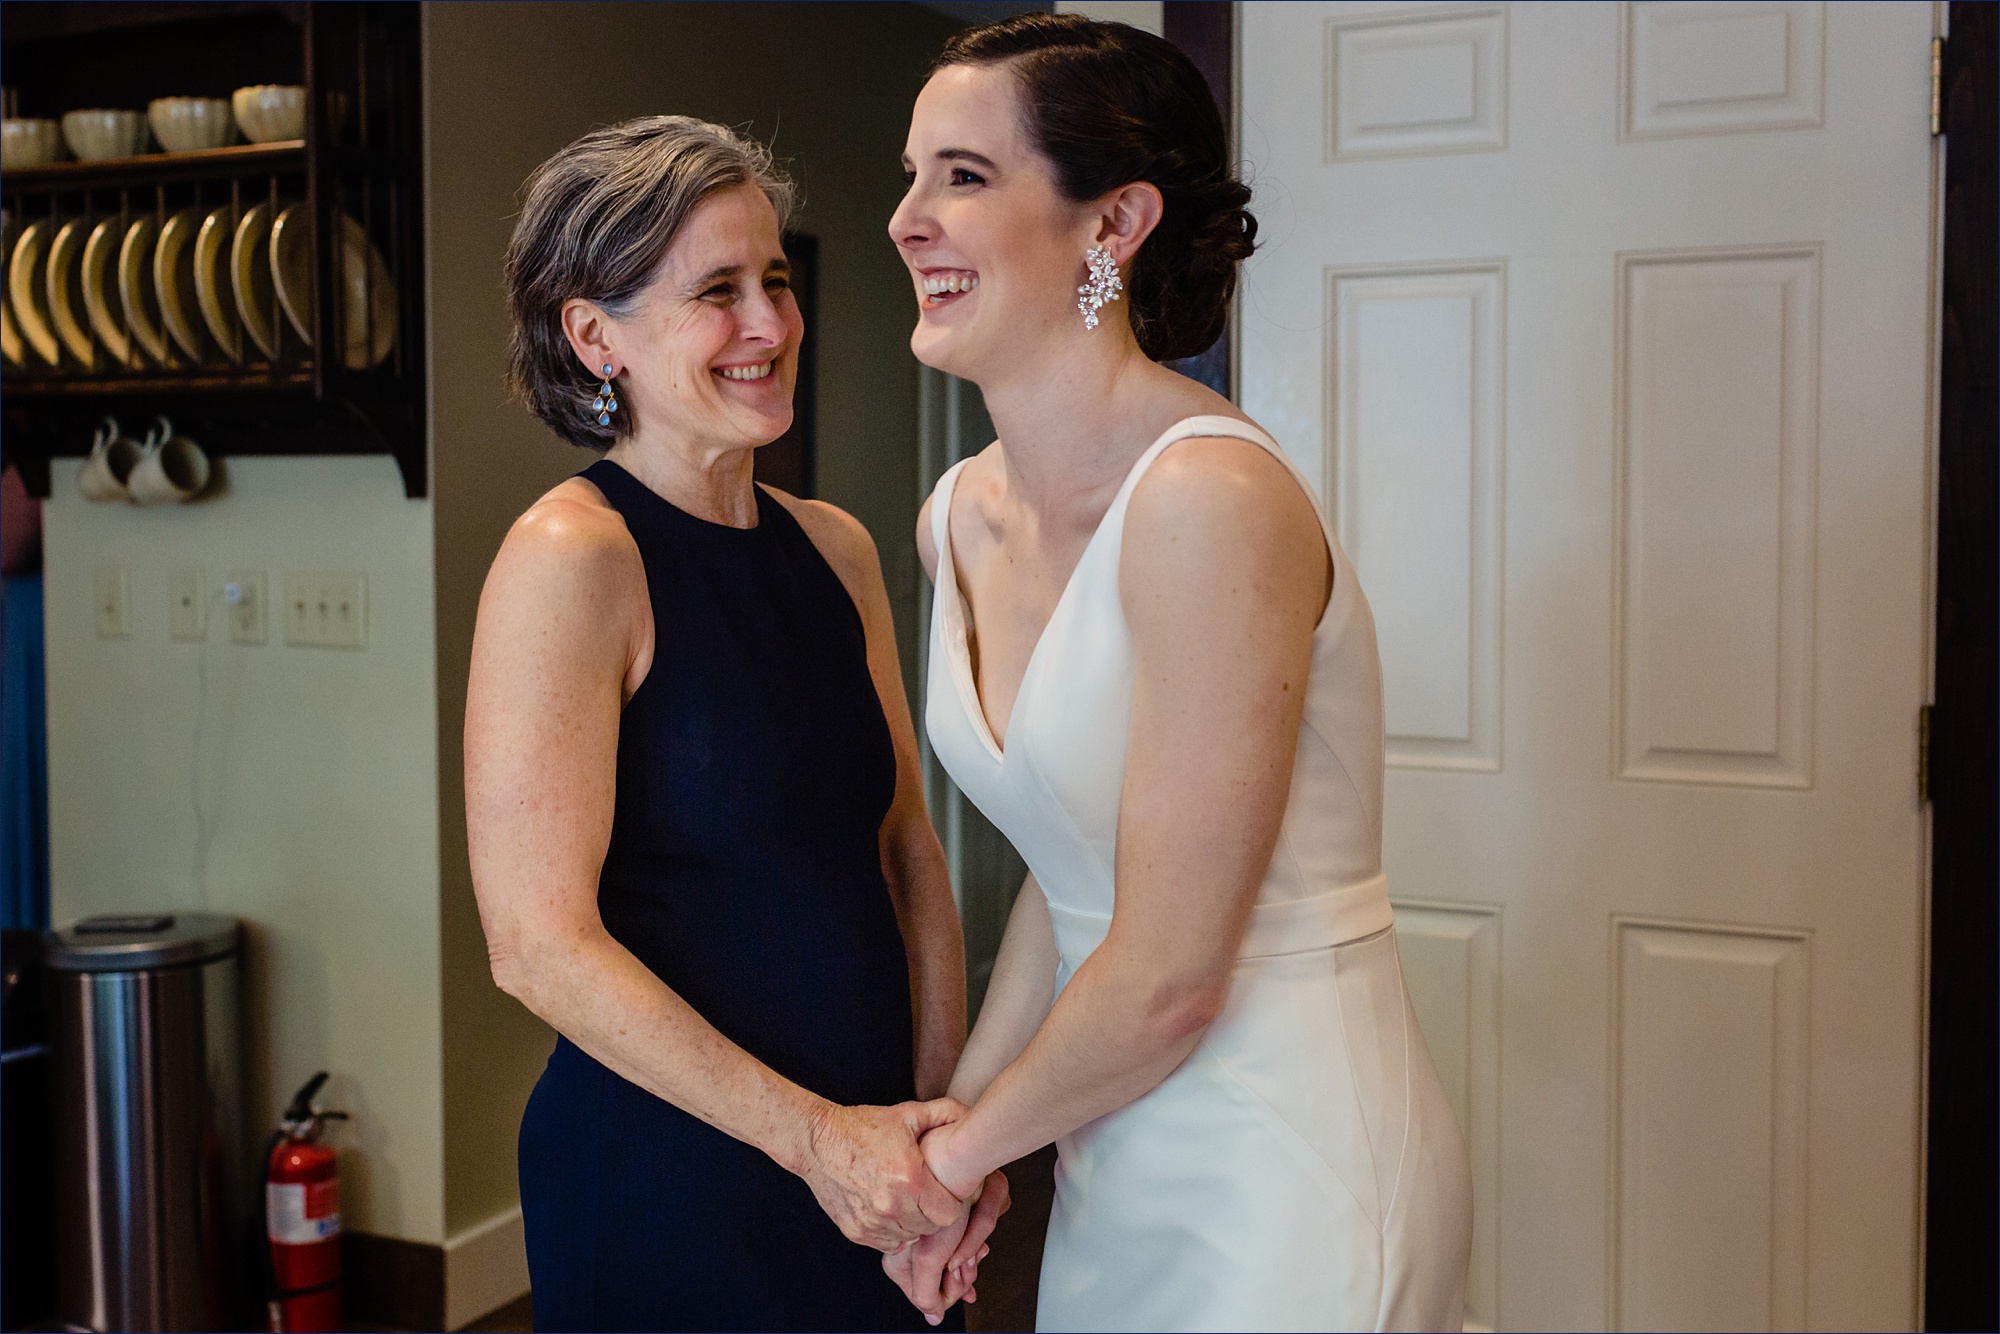 The bride and her mom laugh with one another before the wedding ceremony is going to begin